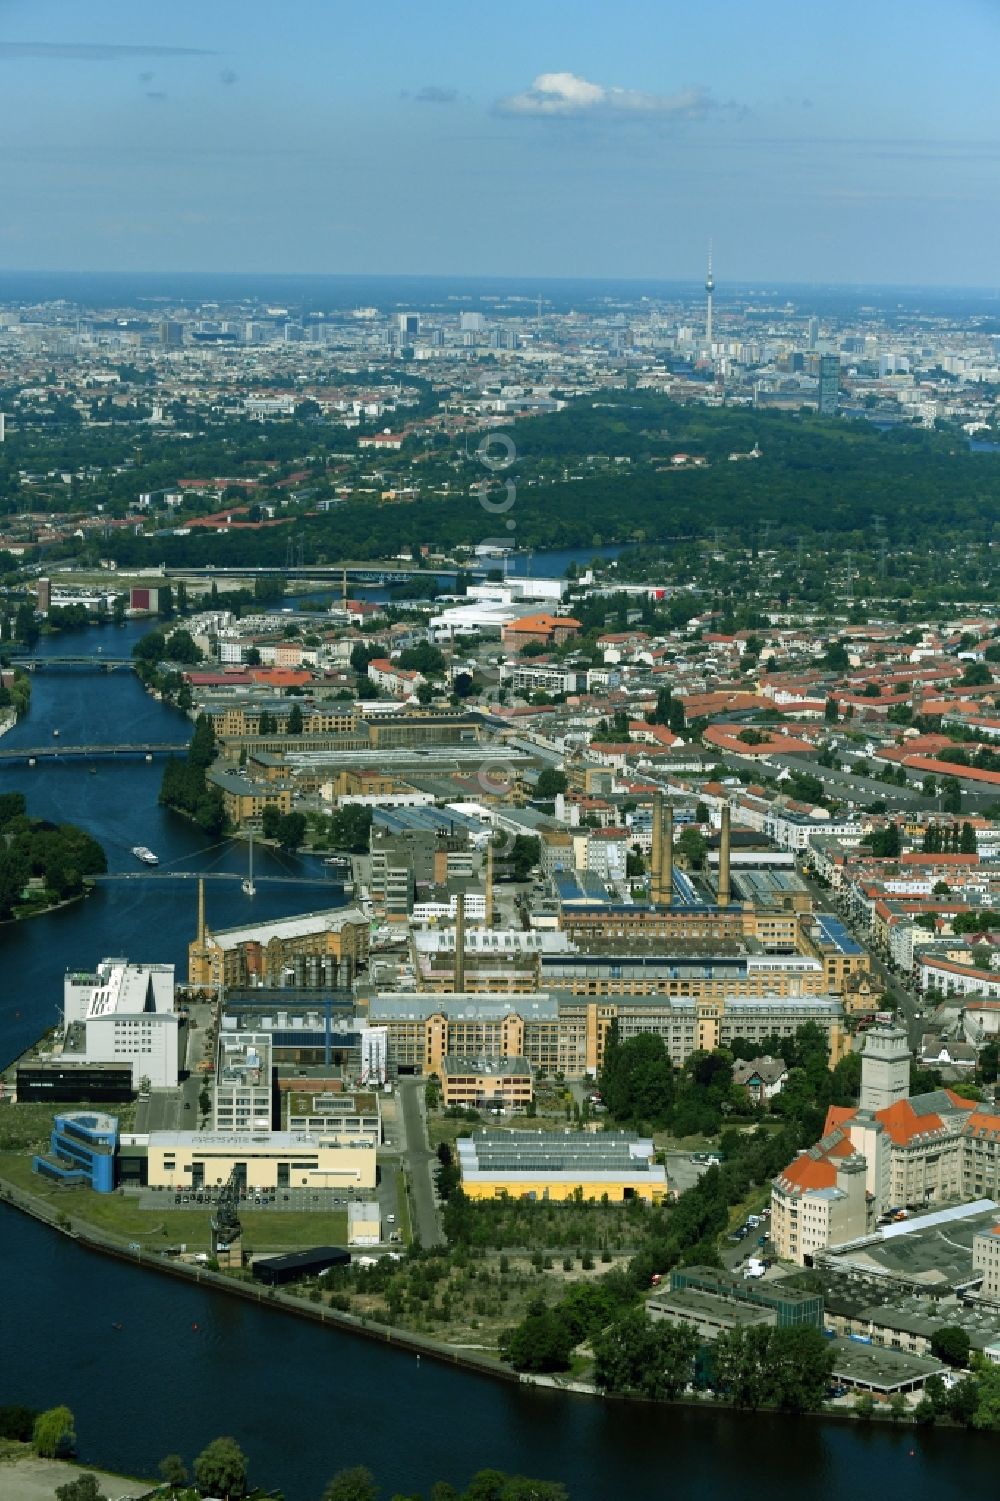 Berlin from above - City view on the river bank of Spree River in the district Oberschoeneweide in Berlin, Germany